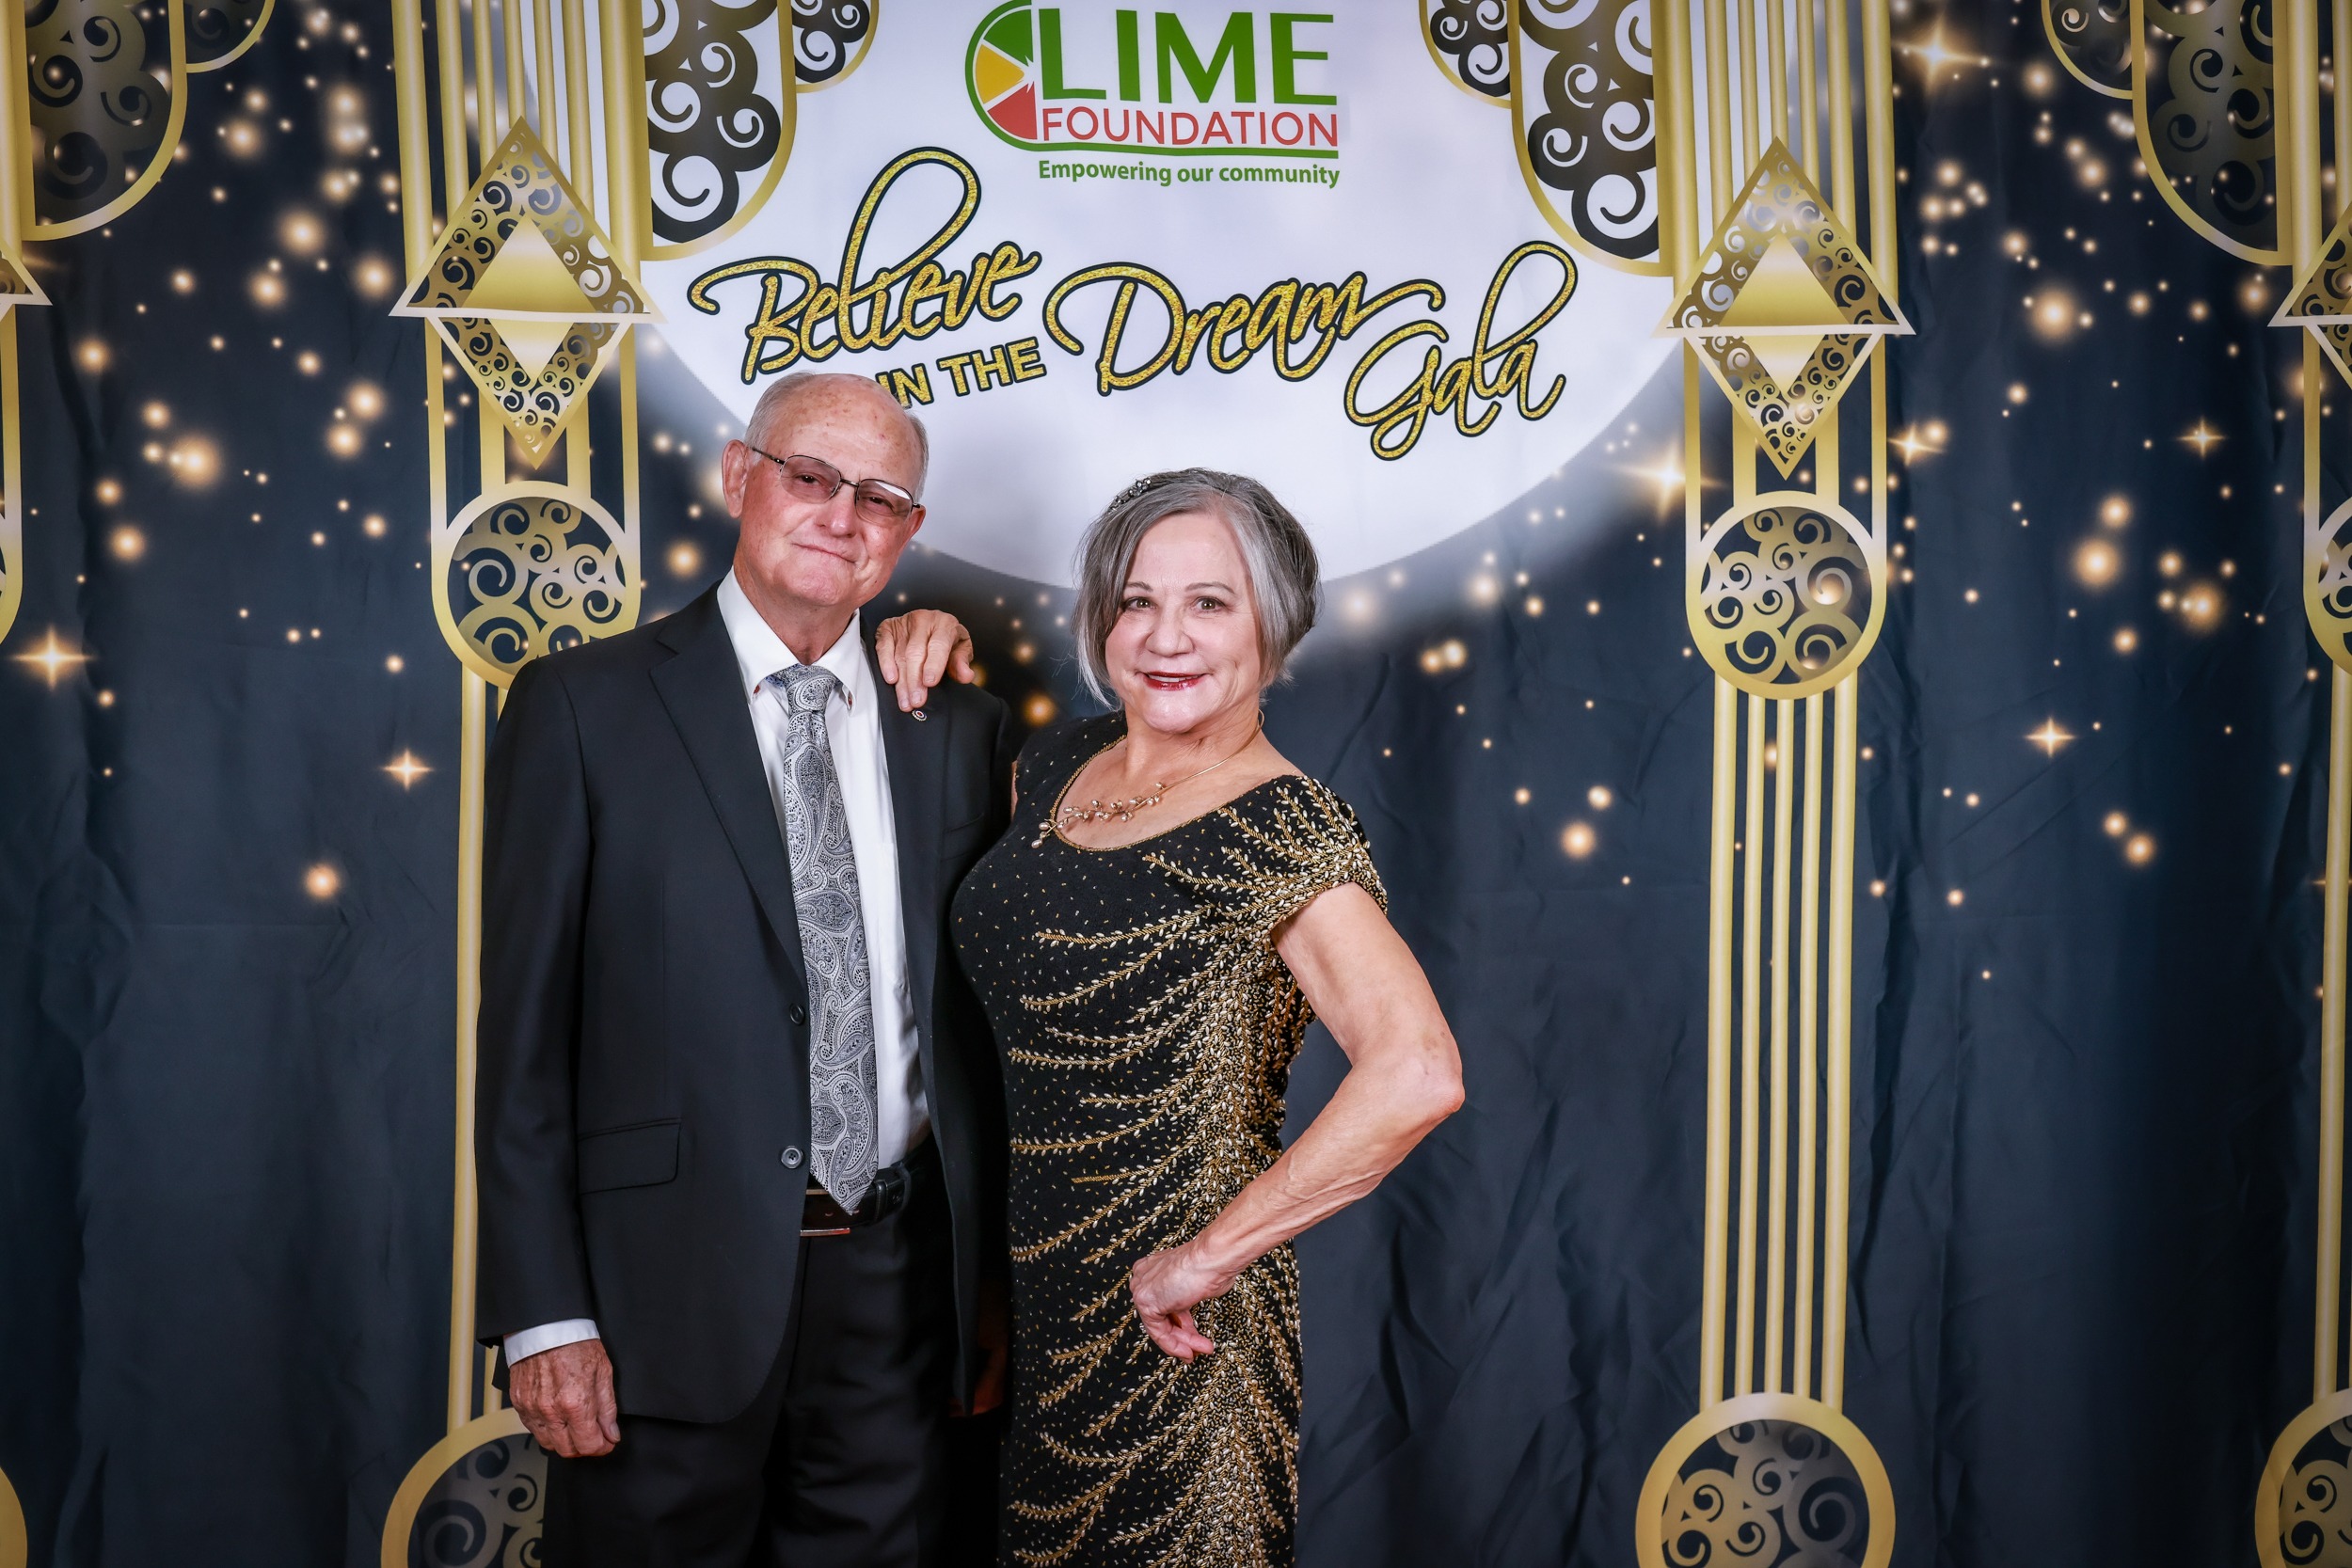 A man and woman posing for a photo in front of a backdrop at The LIME Foundation of Santa Rosa, a non-profit organization.